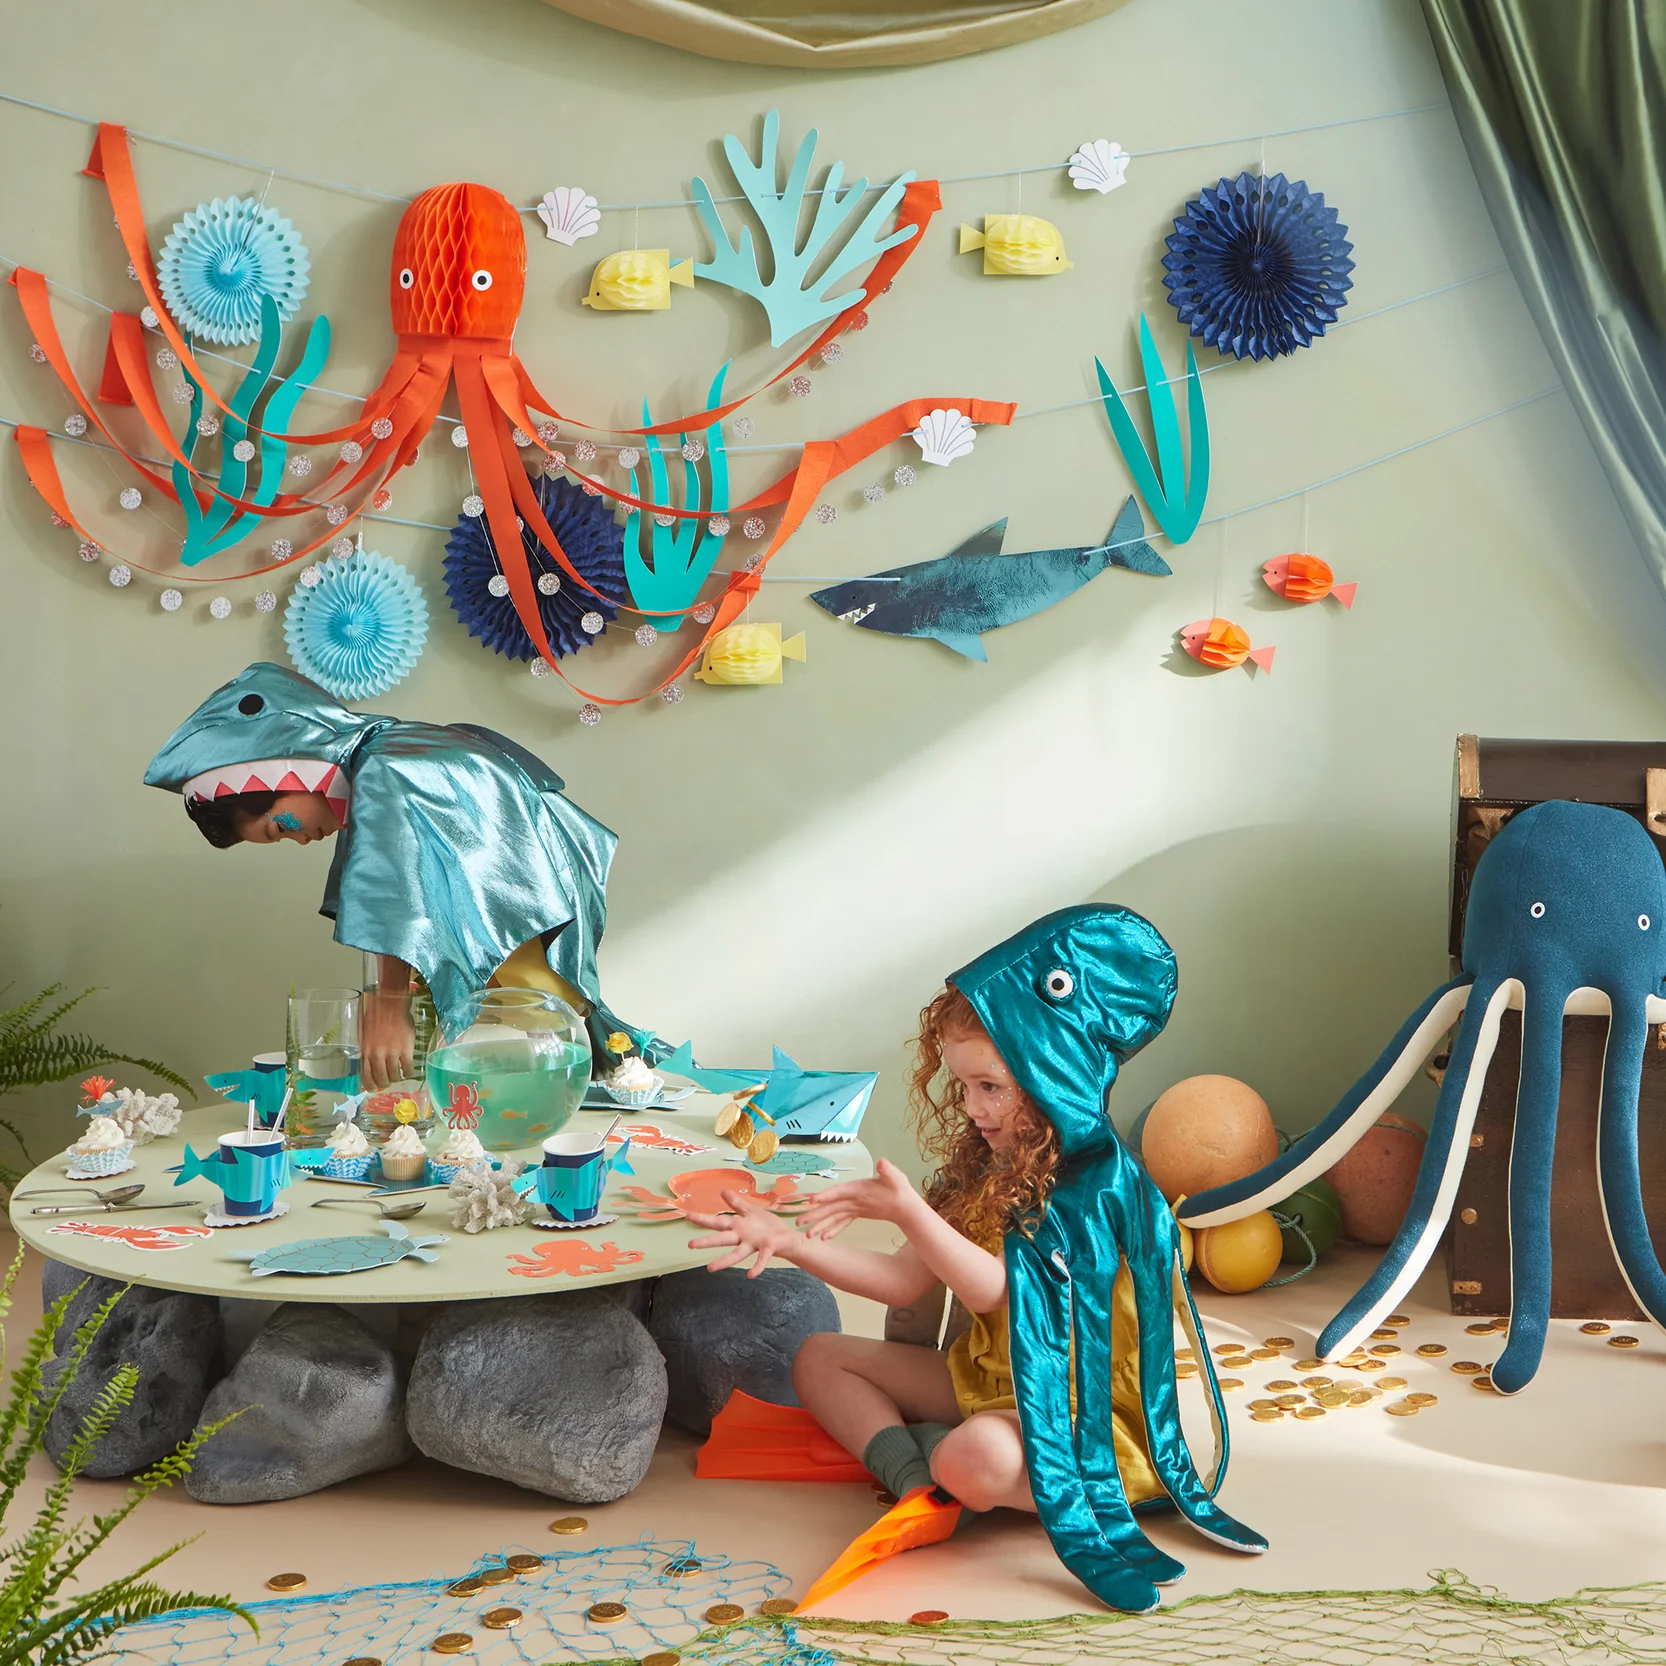 Under the sea party decorations.